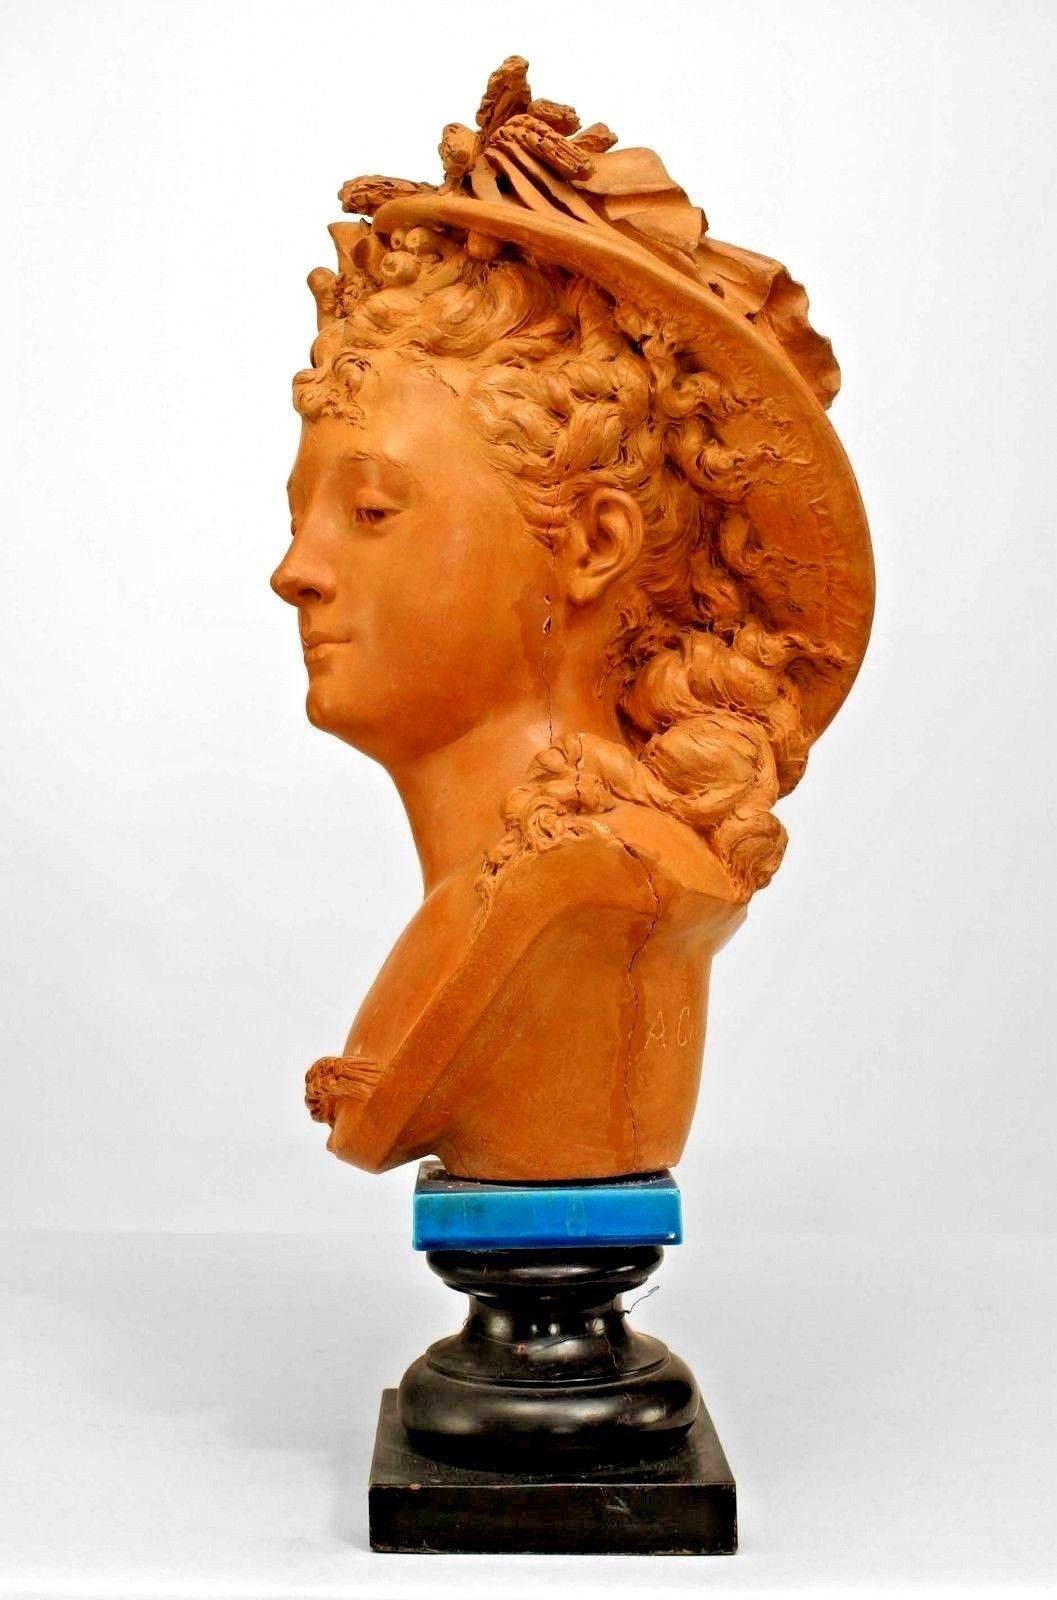 French Victorian terra cotta bust of 19th Century lady wearing a hat and flowers in hair on blue porcelain & black painted square base (signed CARRIER BELLEUSE) (AS IS)
